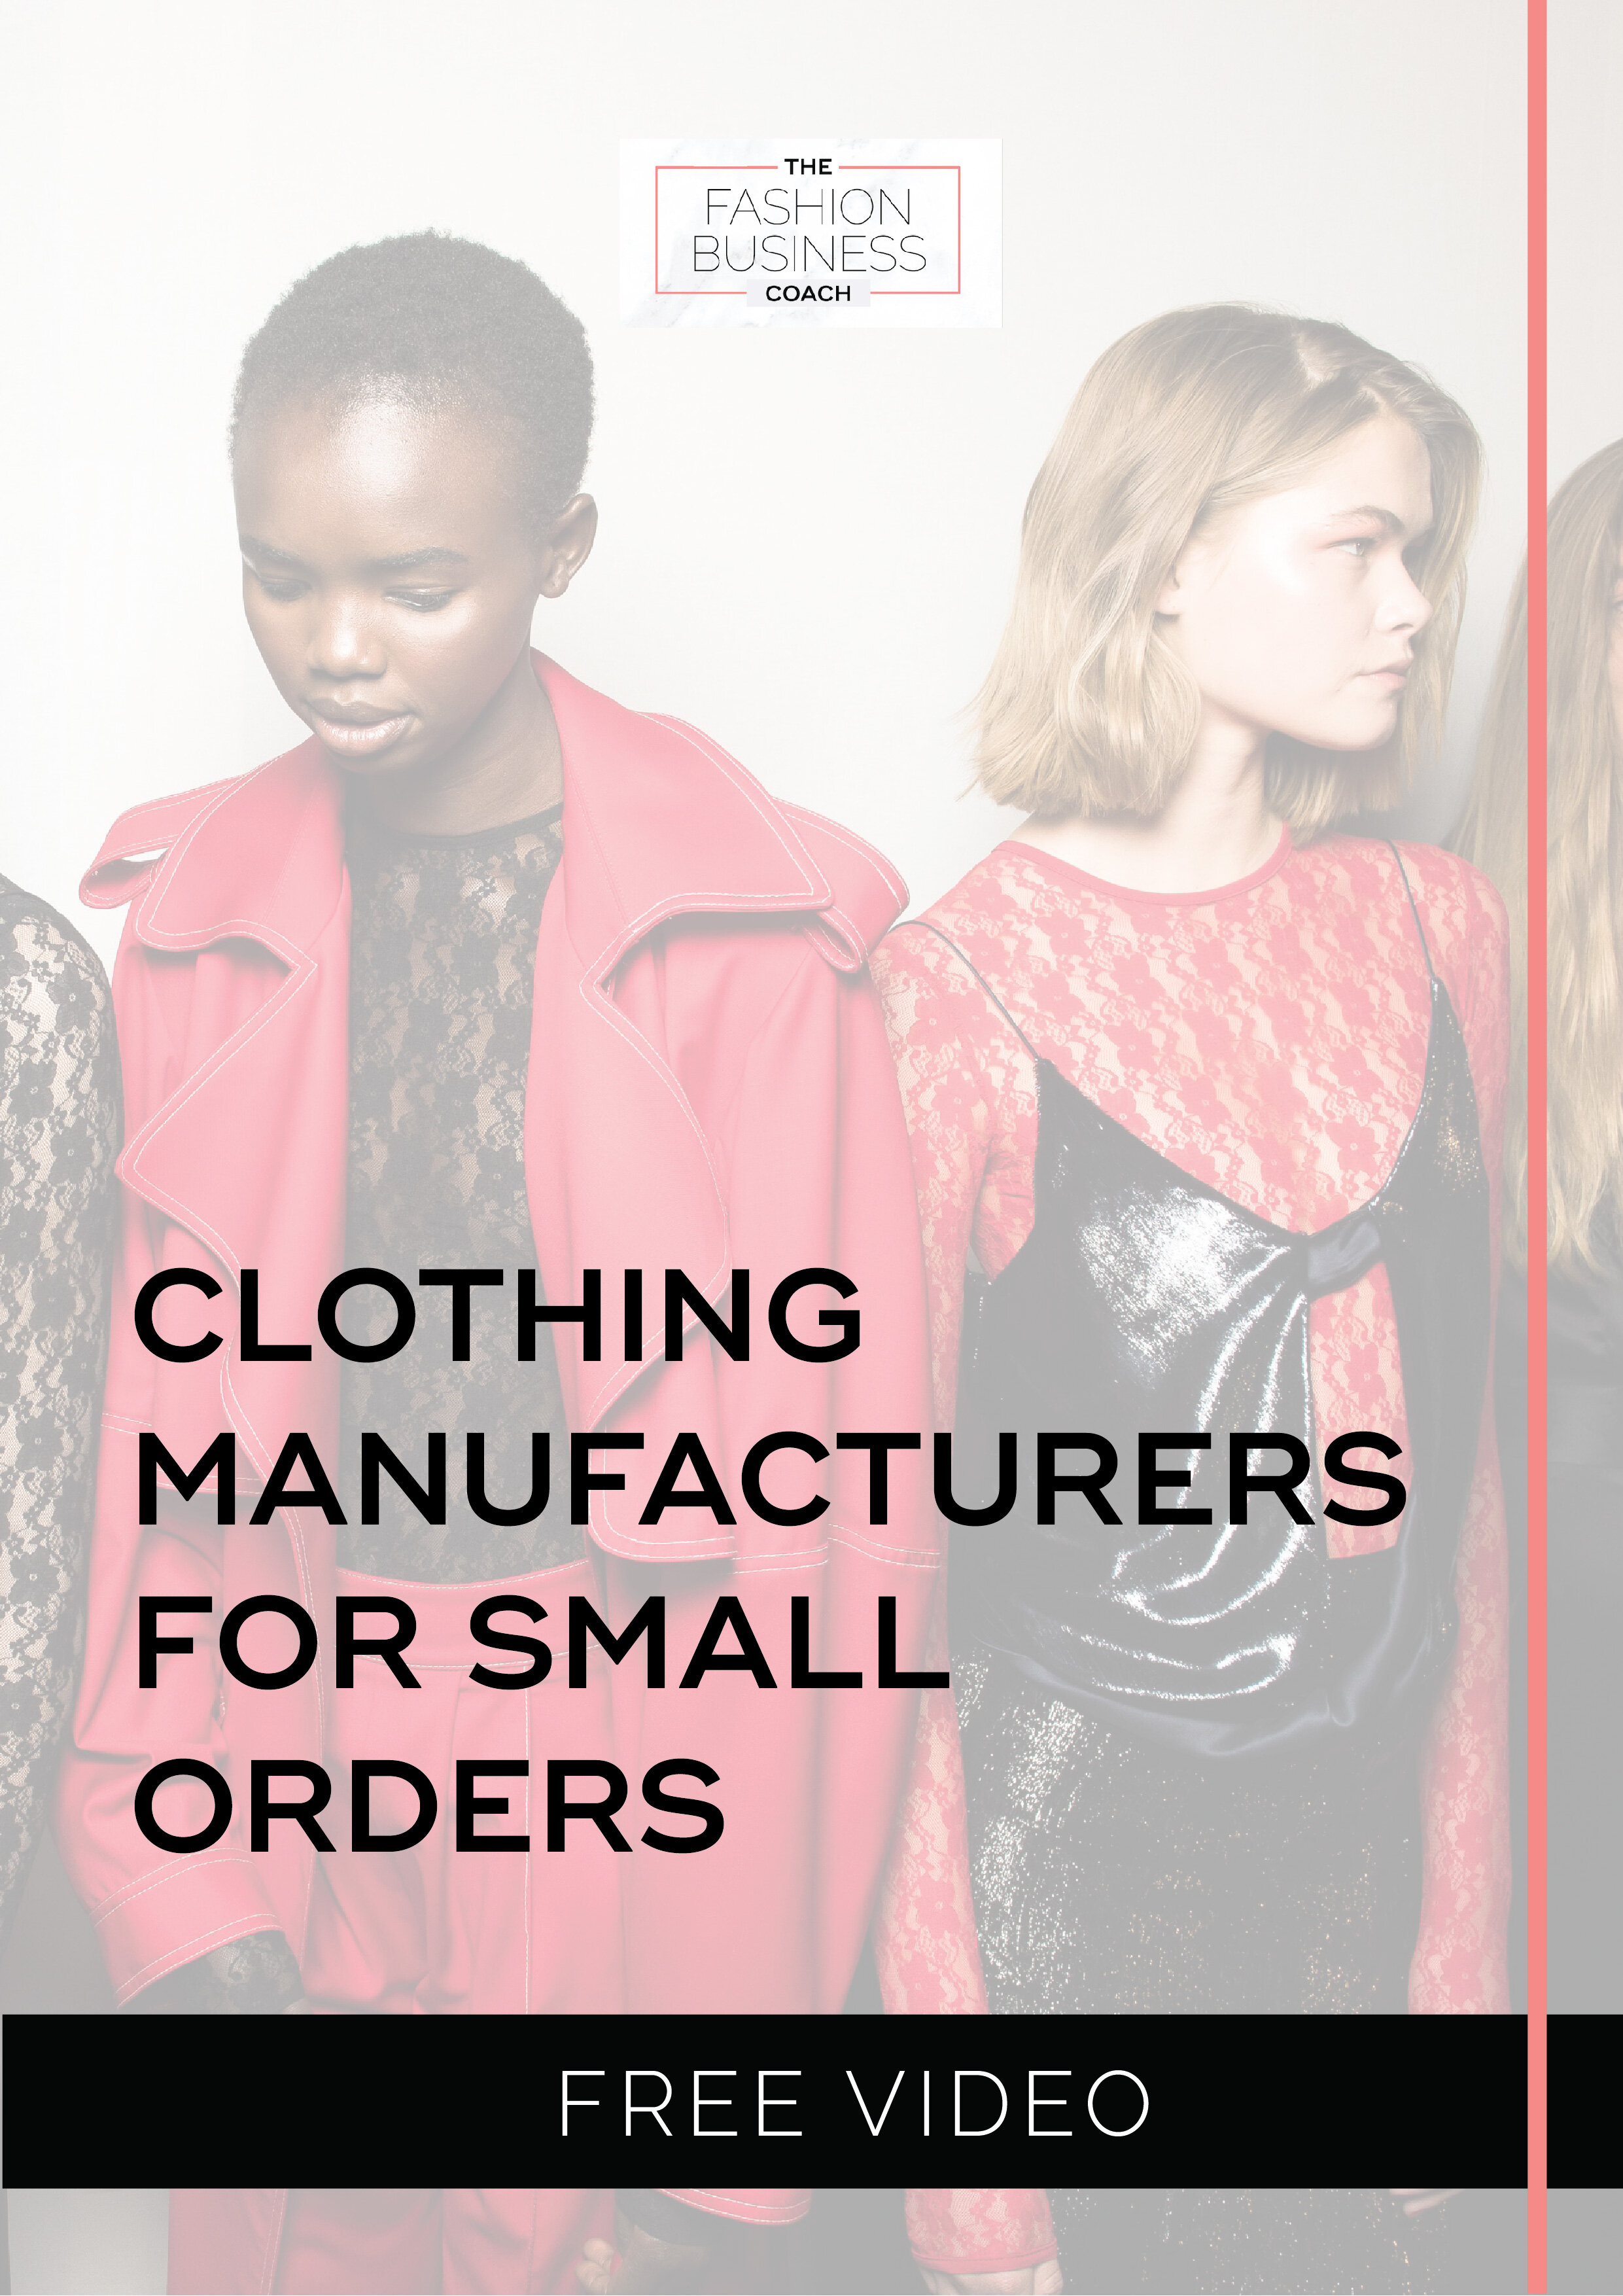 Clothing Manufacturers for Small Orders1.jpg